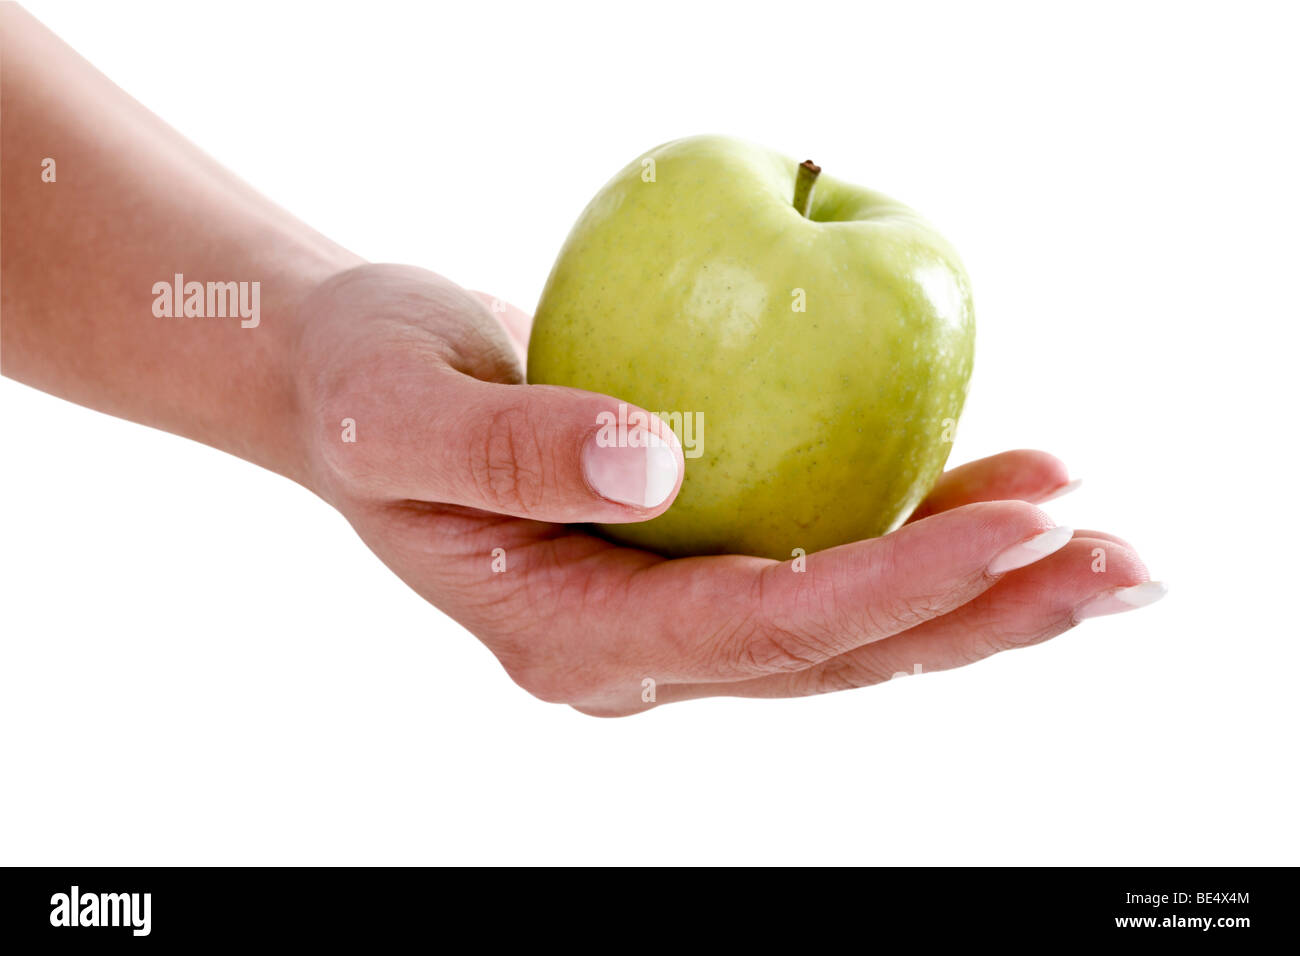 Hand holding a green apple Stock Photo